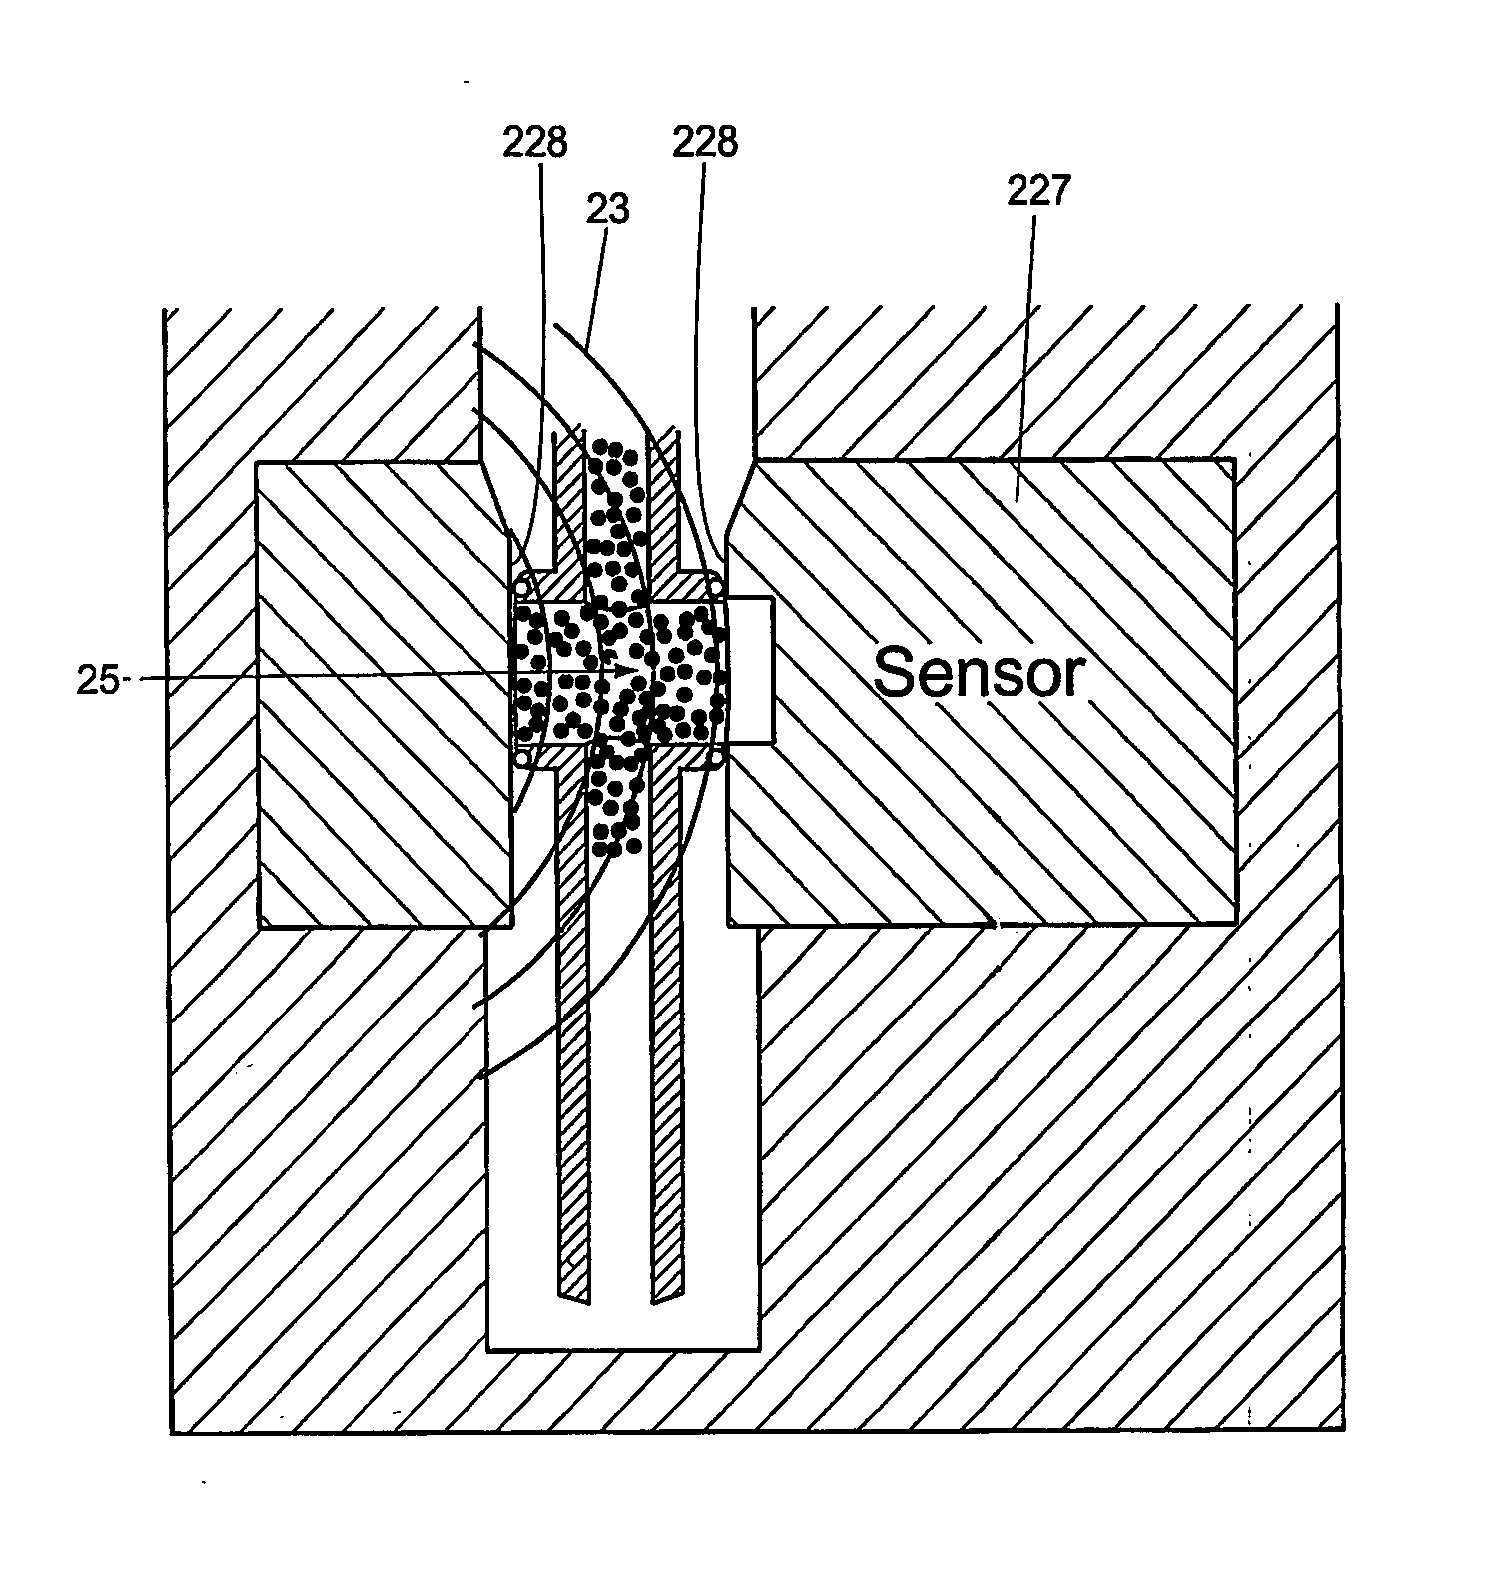 Method and Apparatus for Ultrasonic Determination of Hematocrit and Hemoglobin Concentrations